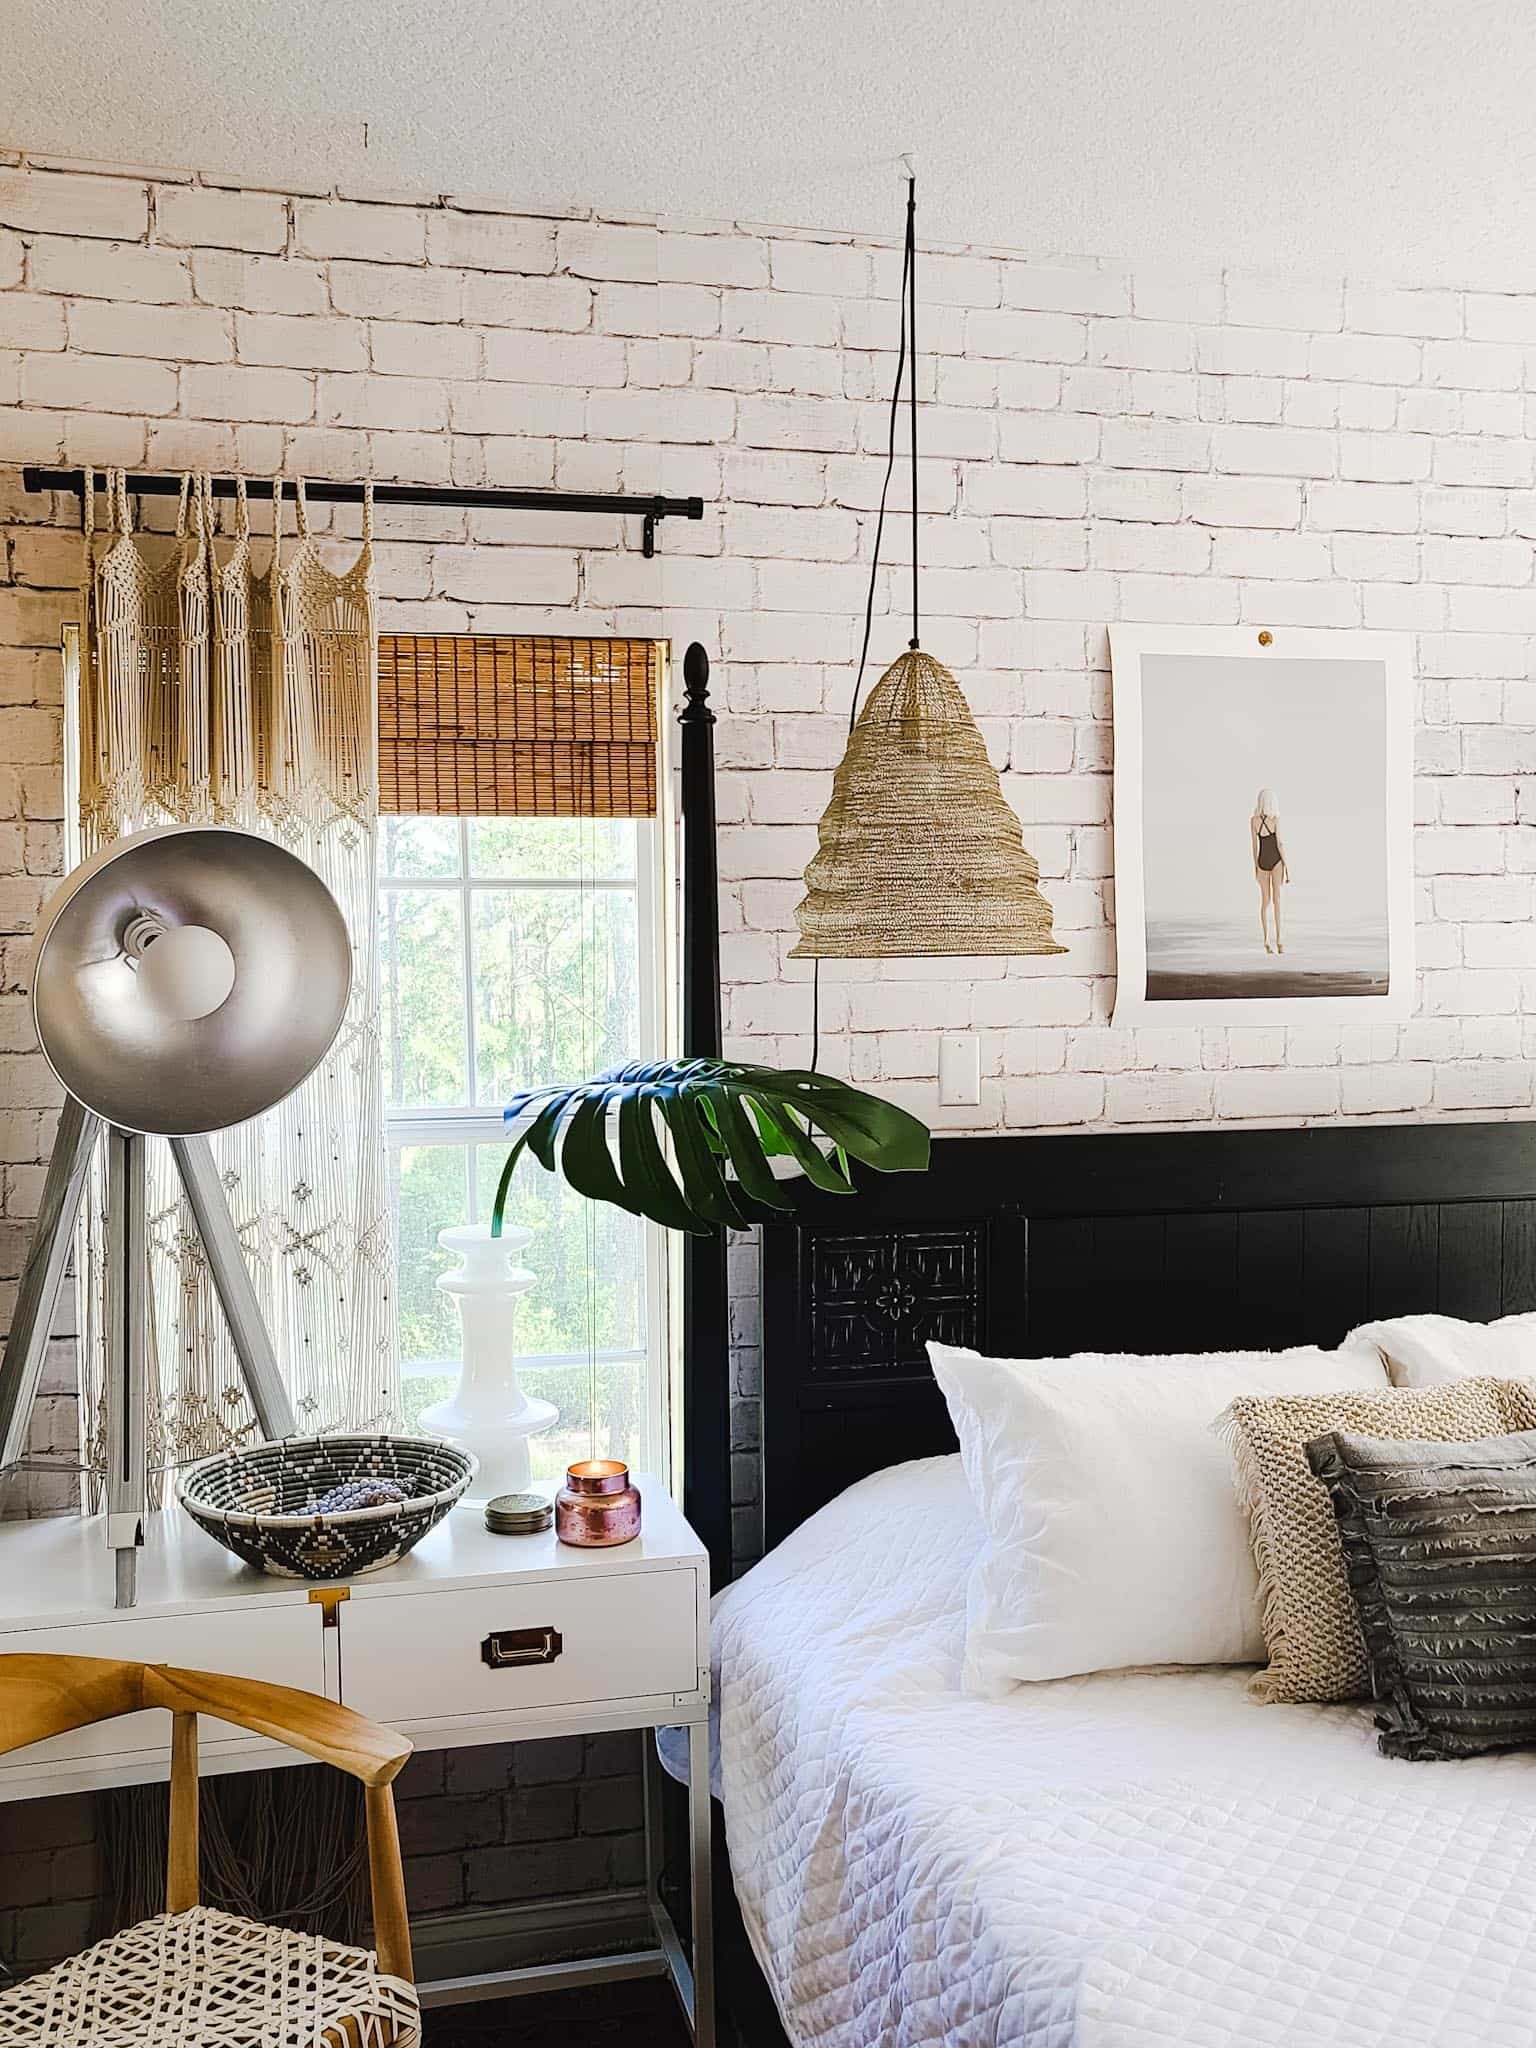 Gallery Wall Home Decor Bedroom Accessories Interior Design Master Bedroom makeover refresh industrial modern boho chic texture black and white baskets cowhide bedding bamboo mirror Joss & Main